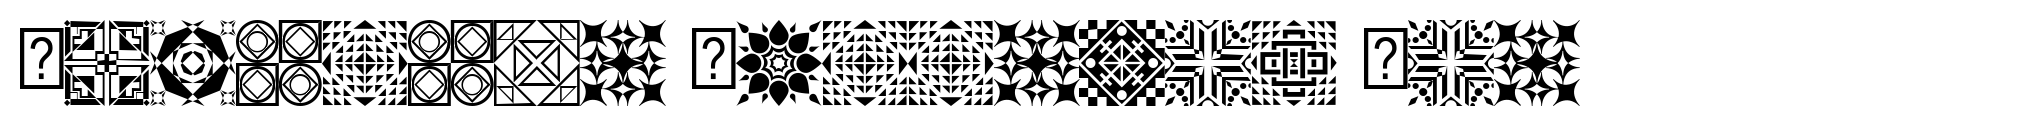 Polytype Patterns One image